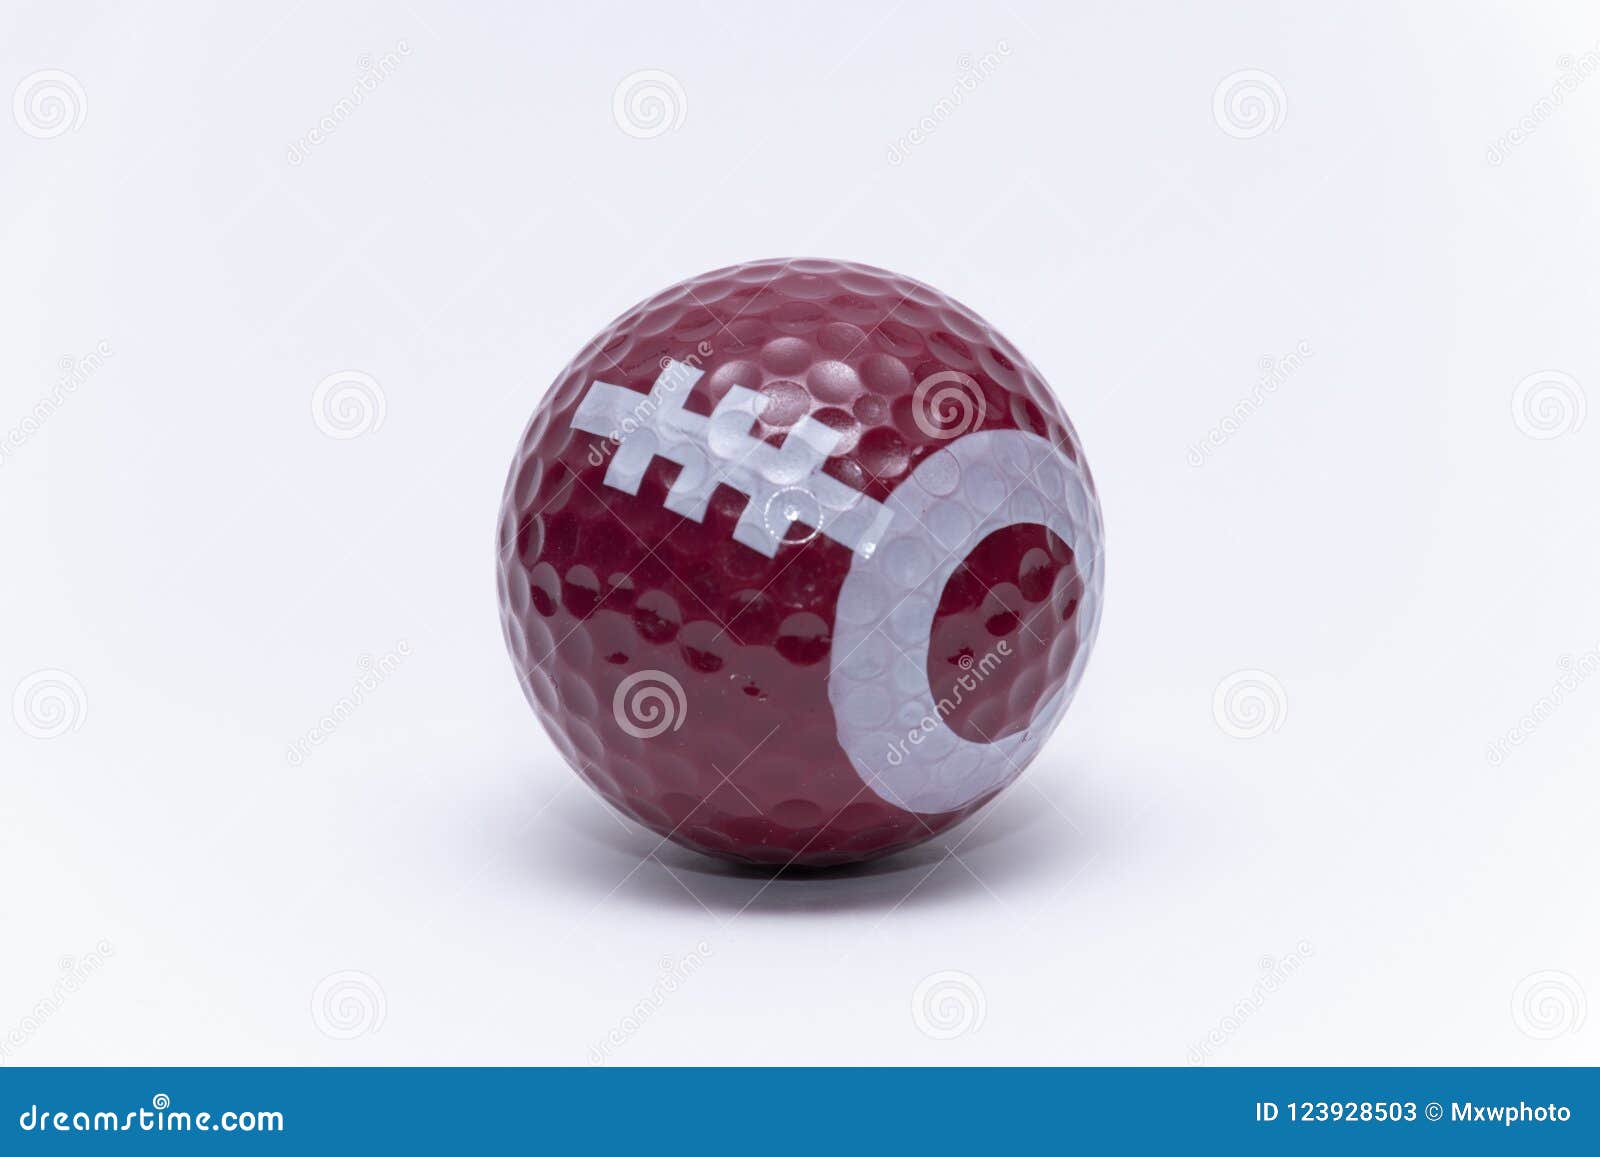 Golfball Painted Like a American Football Ball Golf Balls Stock Image Image of hole, paint: 123928503